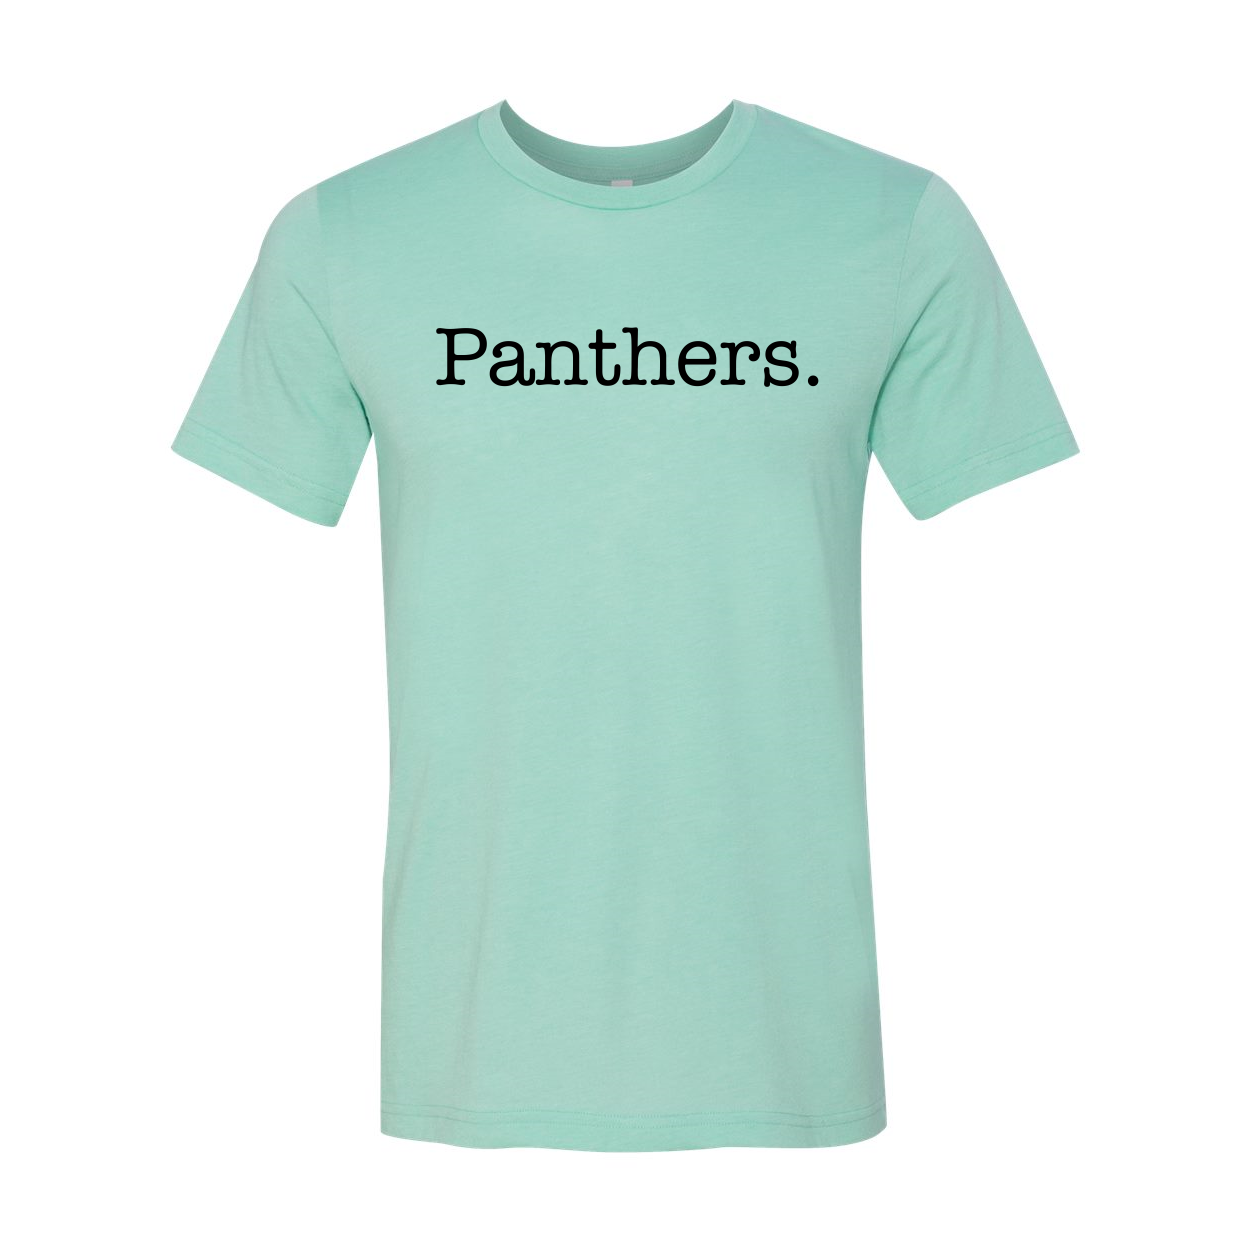 Panthers. Soft Tee